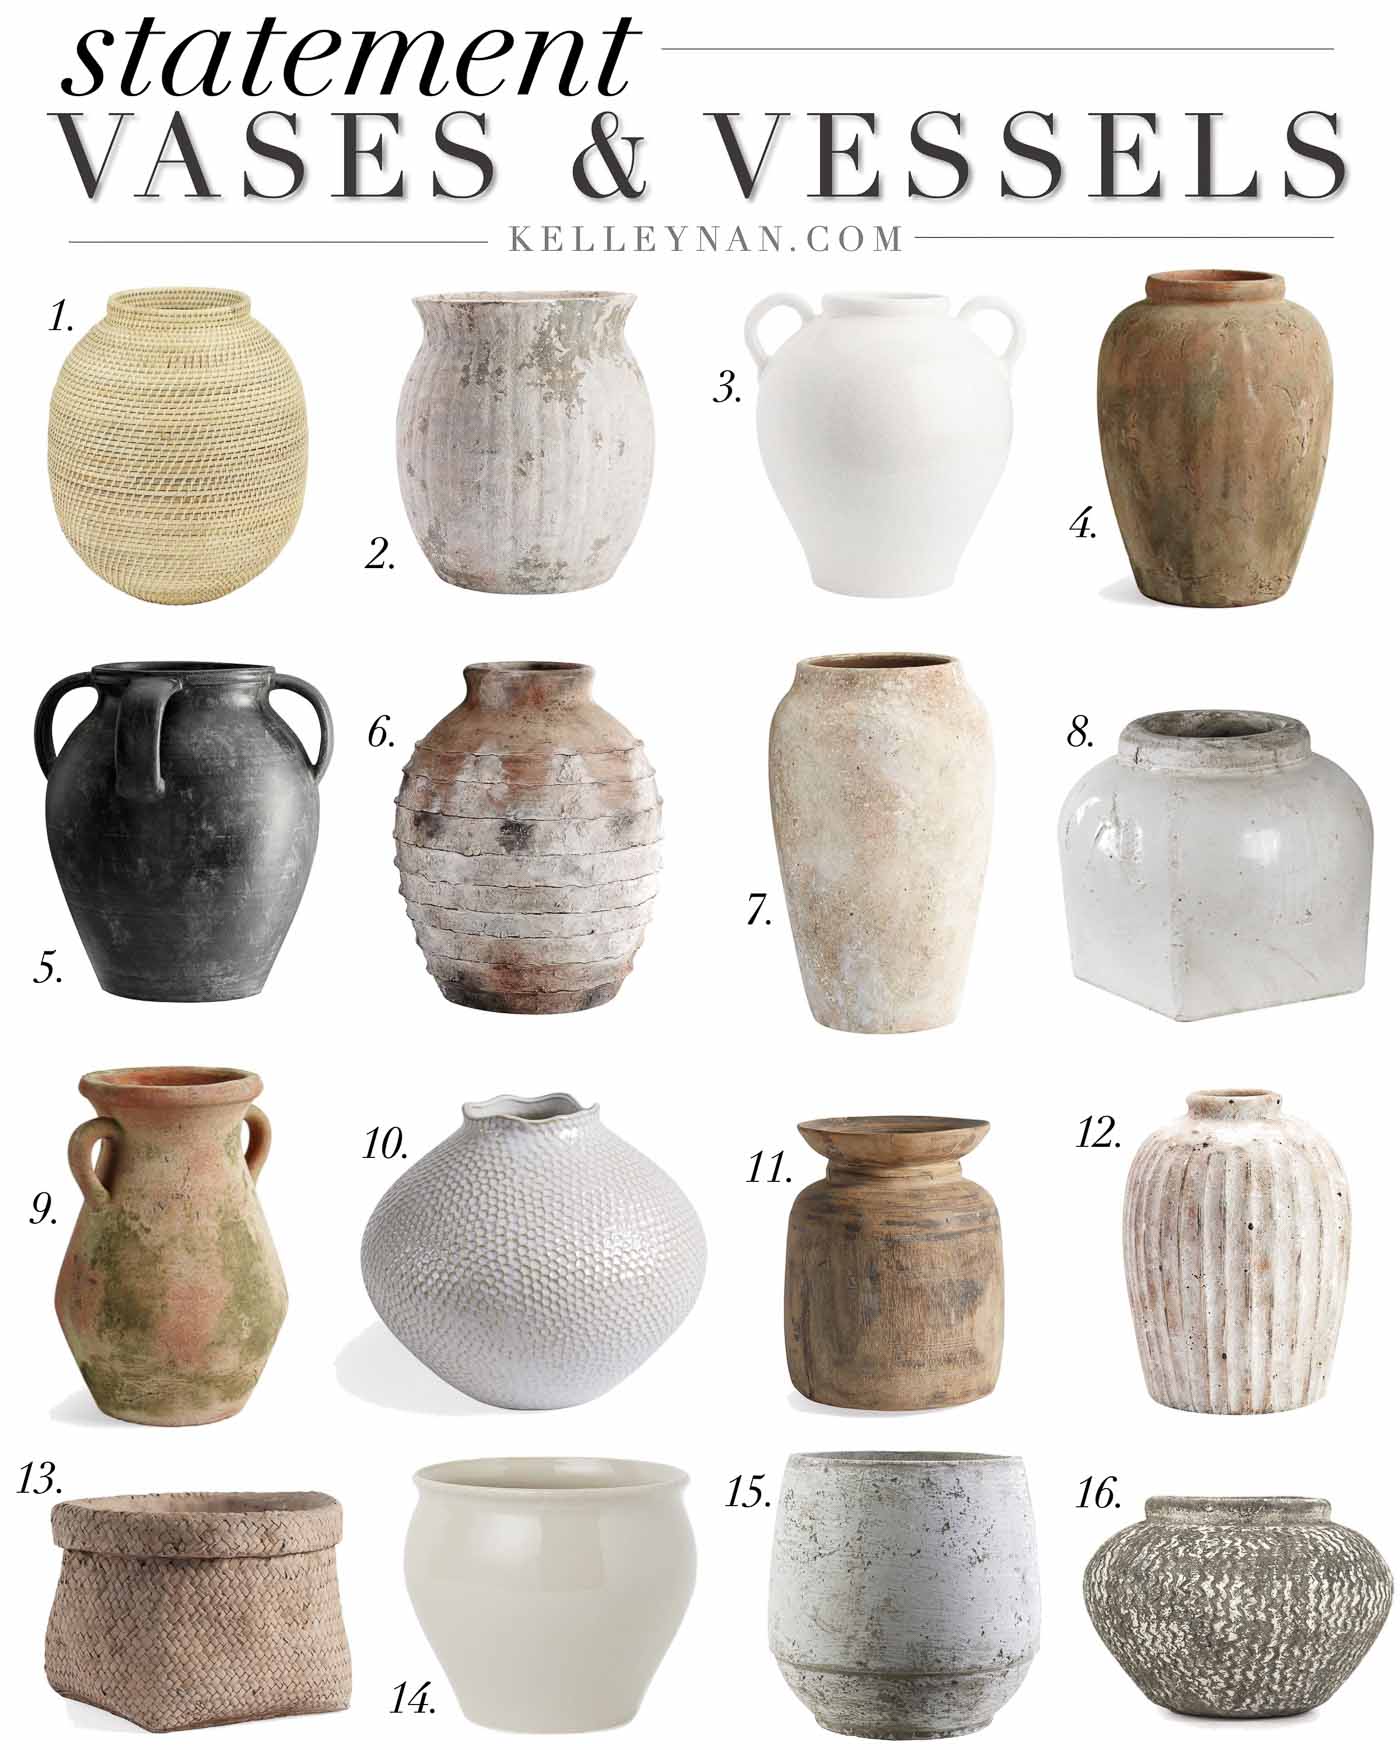 Organic, Rustic Statement Vases with Tons of Texture (for lots of budgets and price points!)